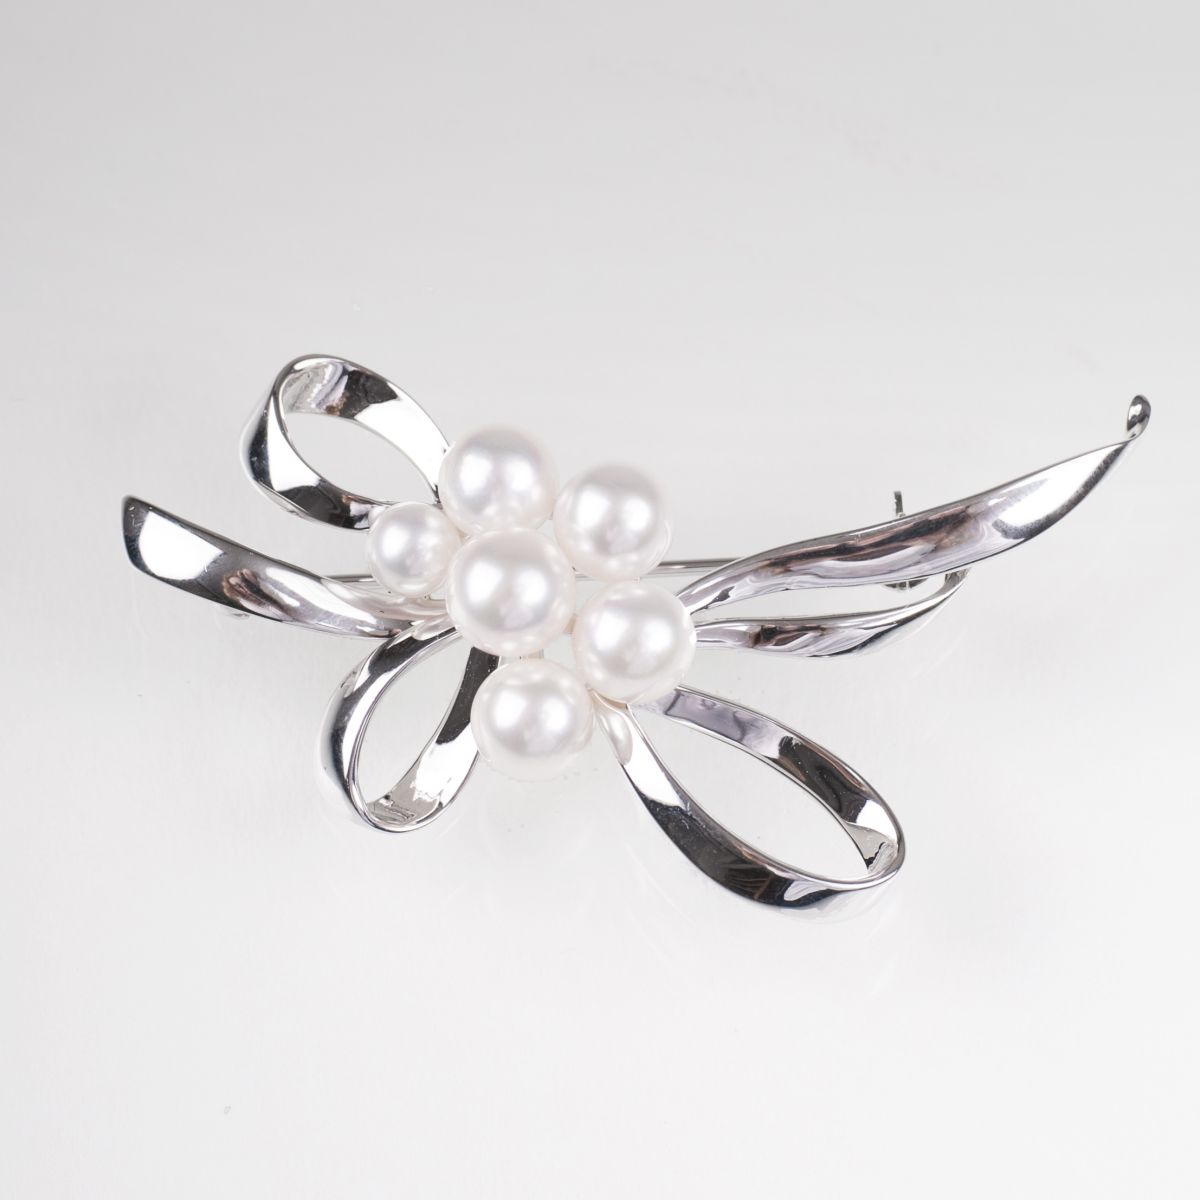 A small pearl brooch by K. Mikimoto